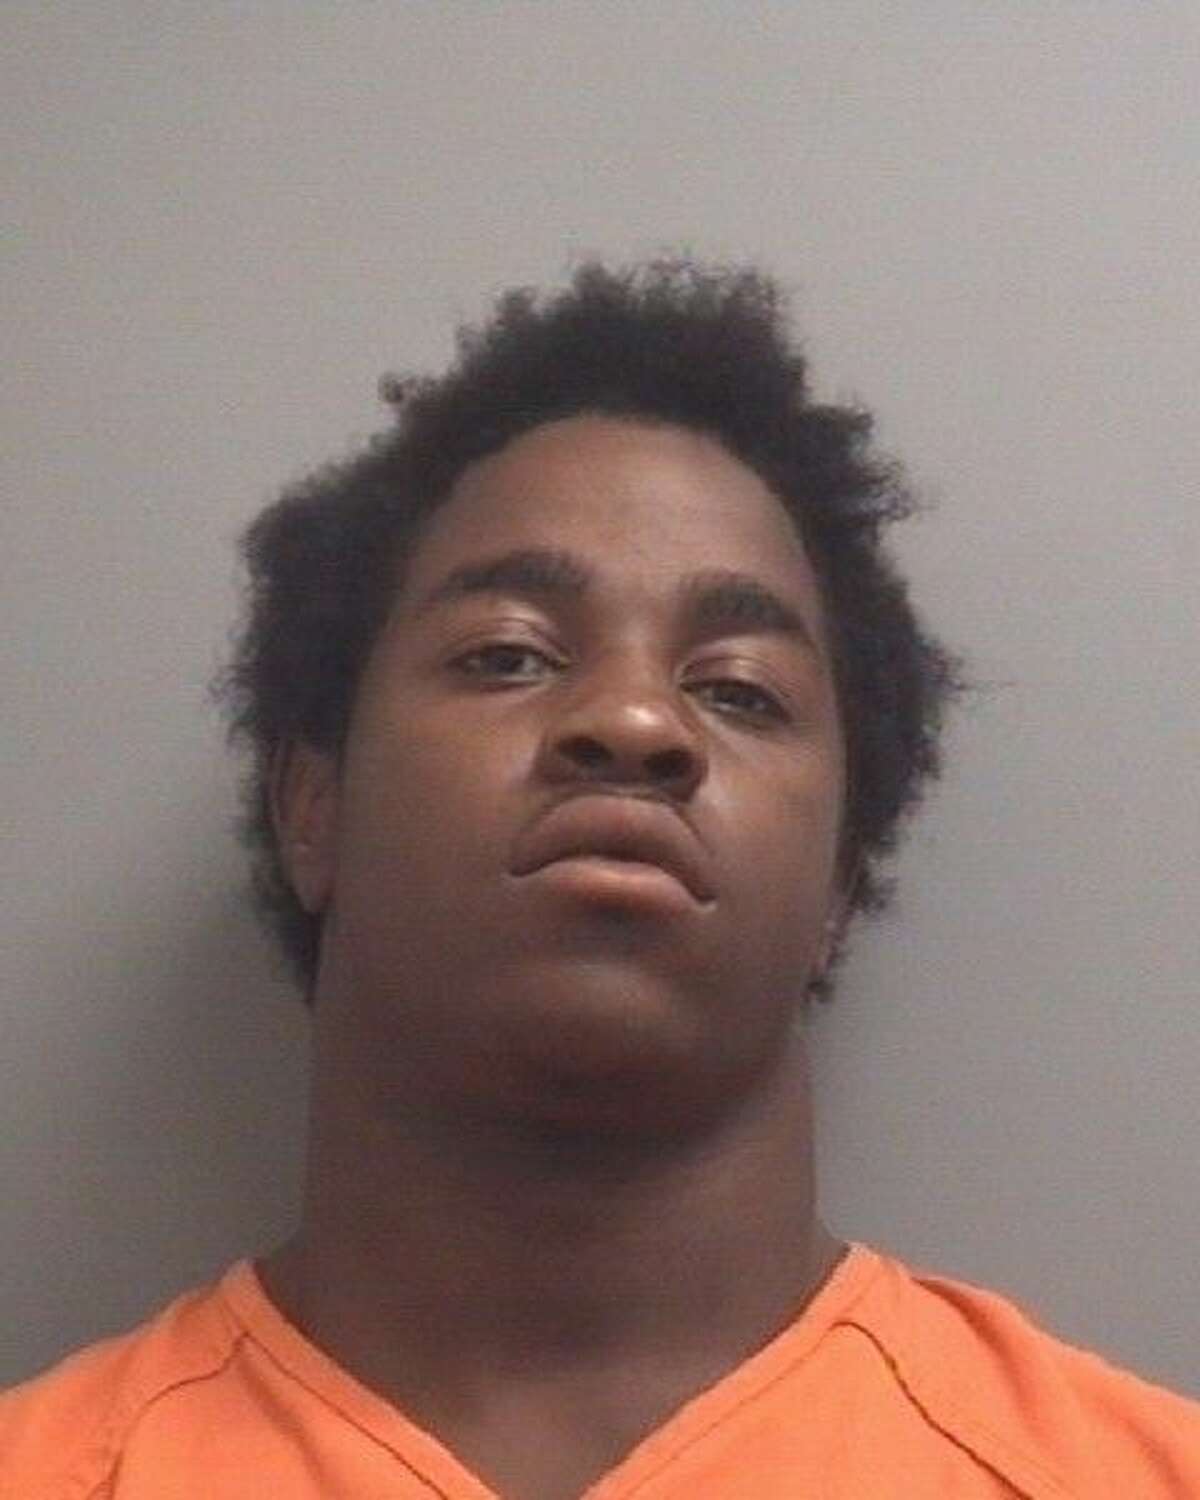 Devonte Vining, 19, of Spring, was arrested by La Porte Police for his alleged involvement in an AT&T store burglary on Oct. 21.